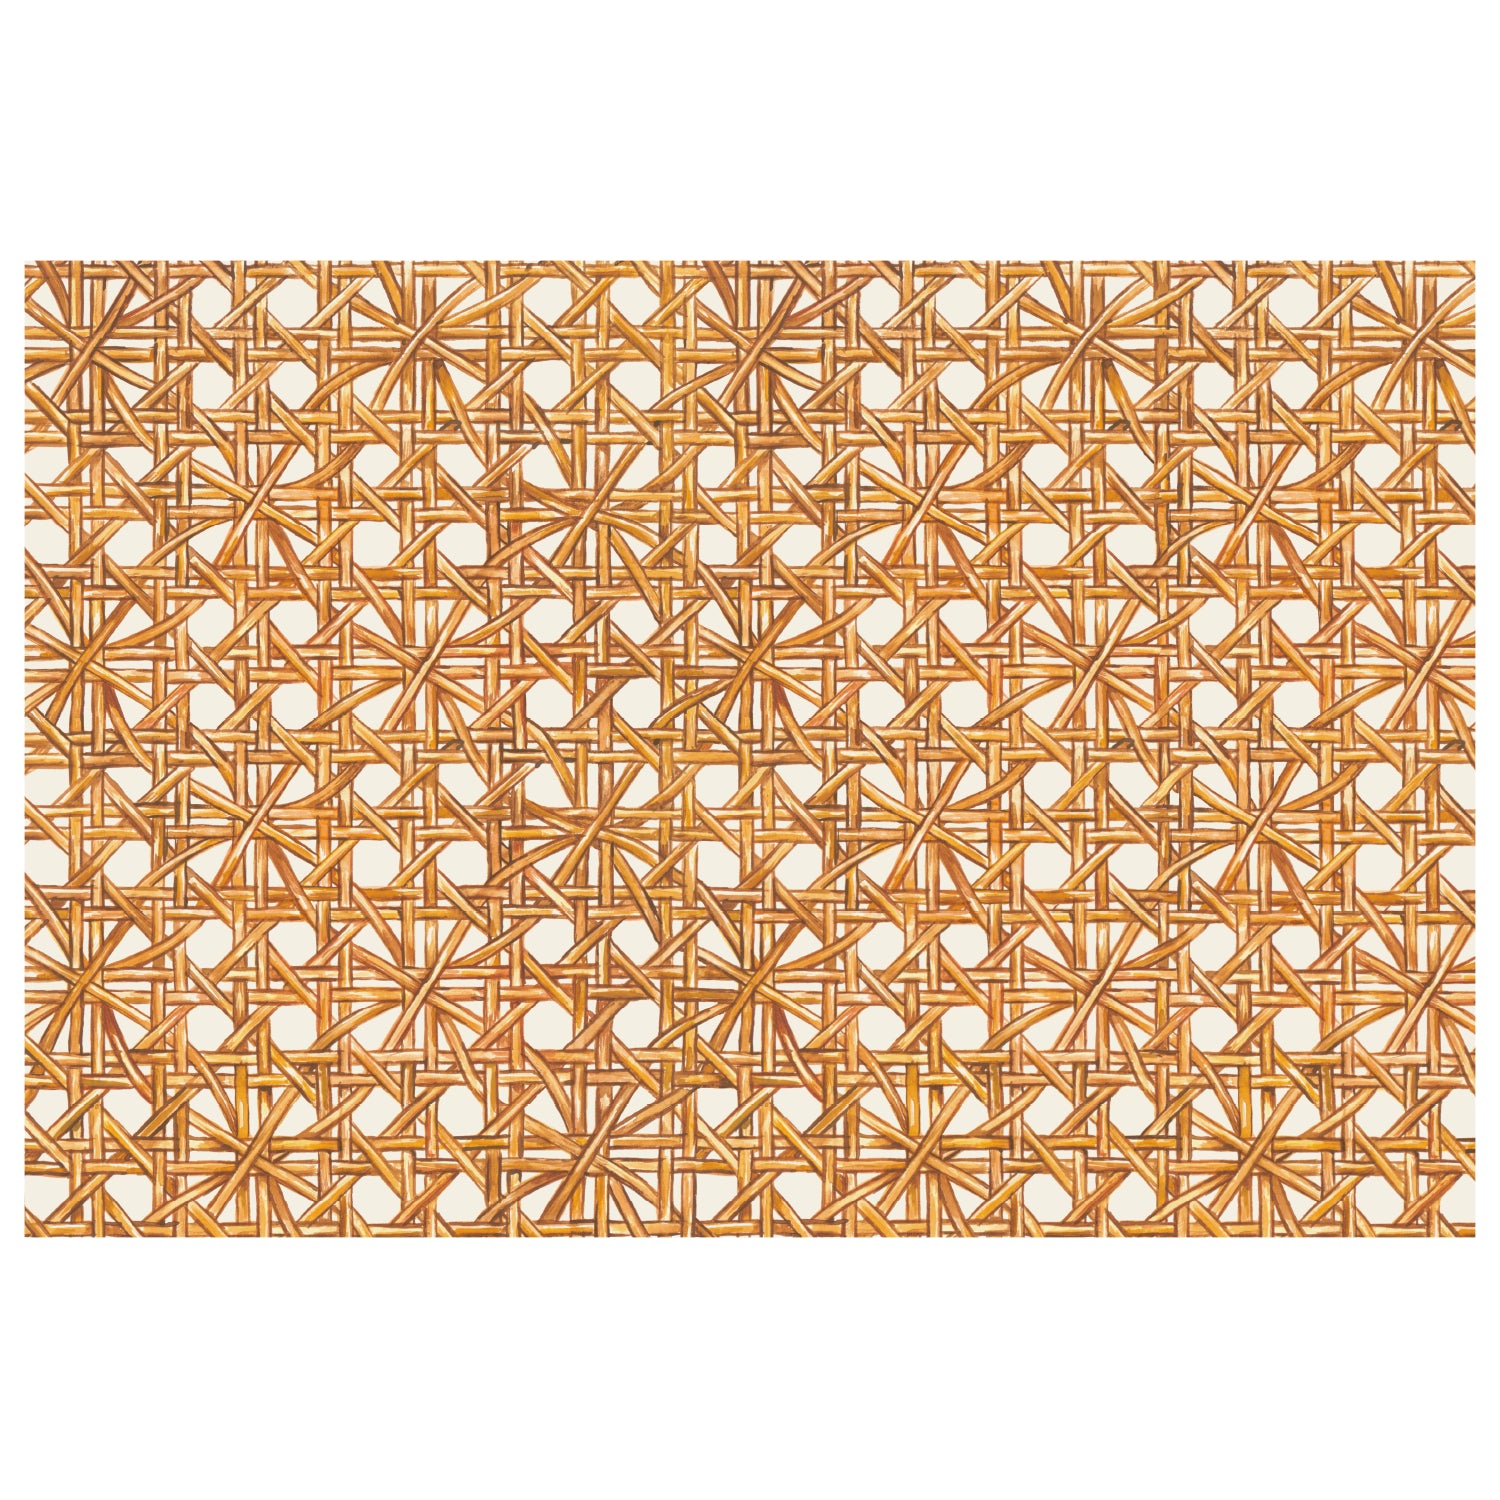 A classic Rattan Weave Placemat with a Rattan Weave caning pattern, in orange and white, from Hester &amp; Cook.